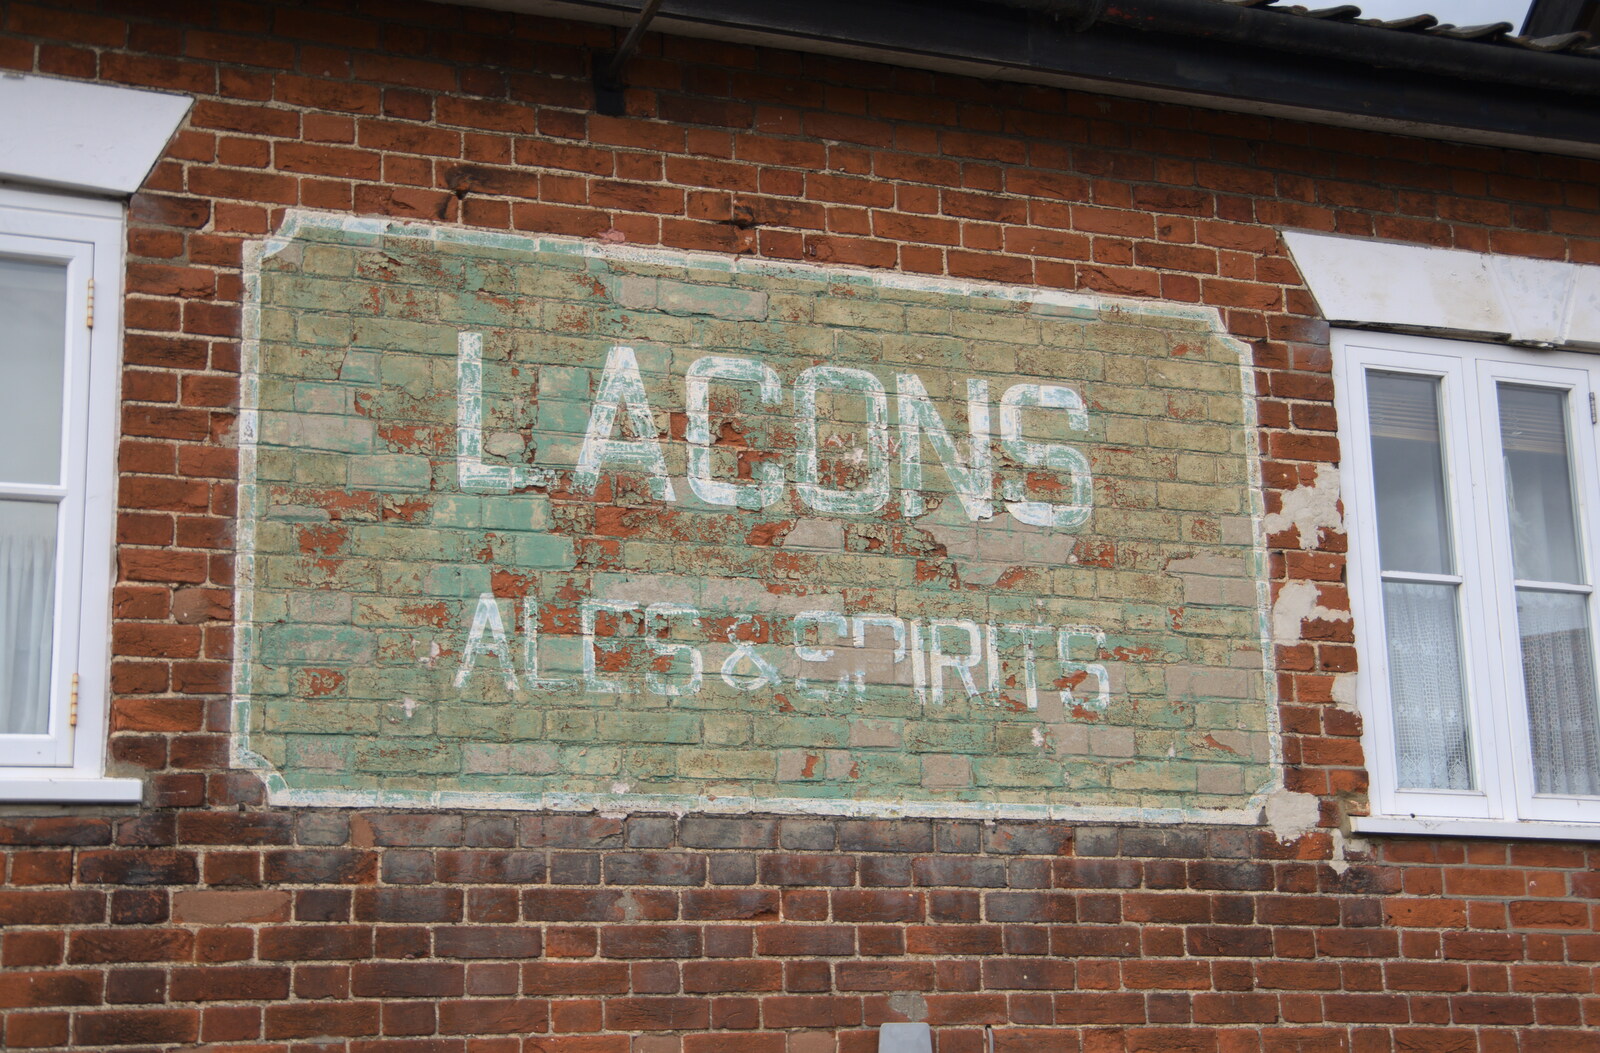 An old Lacon's pub sign from A Picnic at Clive and Suzanne's, Braisworth, Suffolk - 11th July 2020